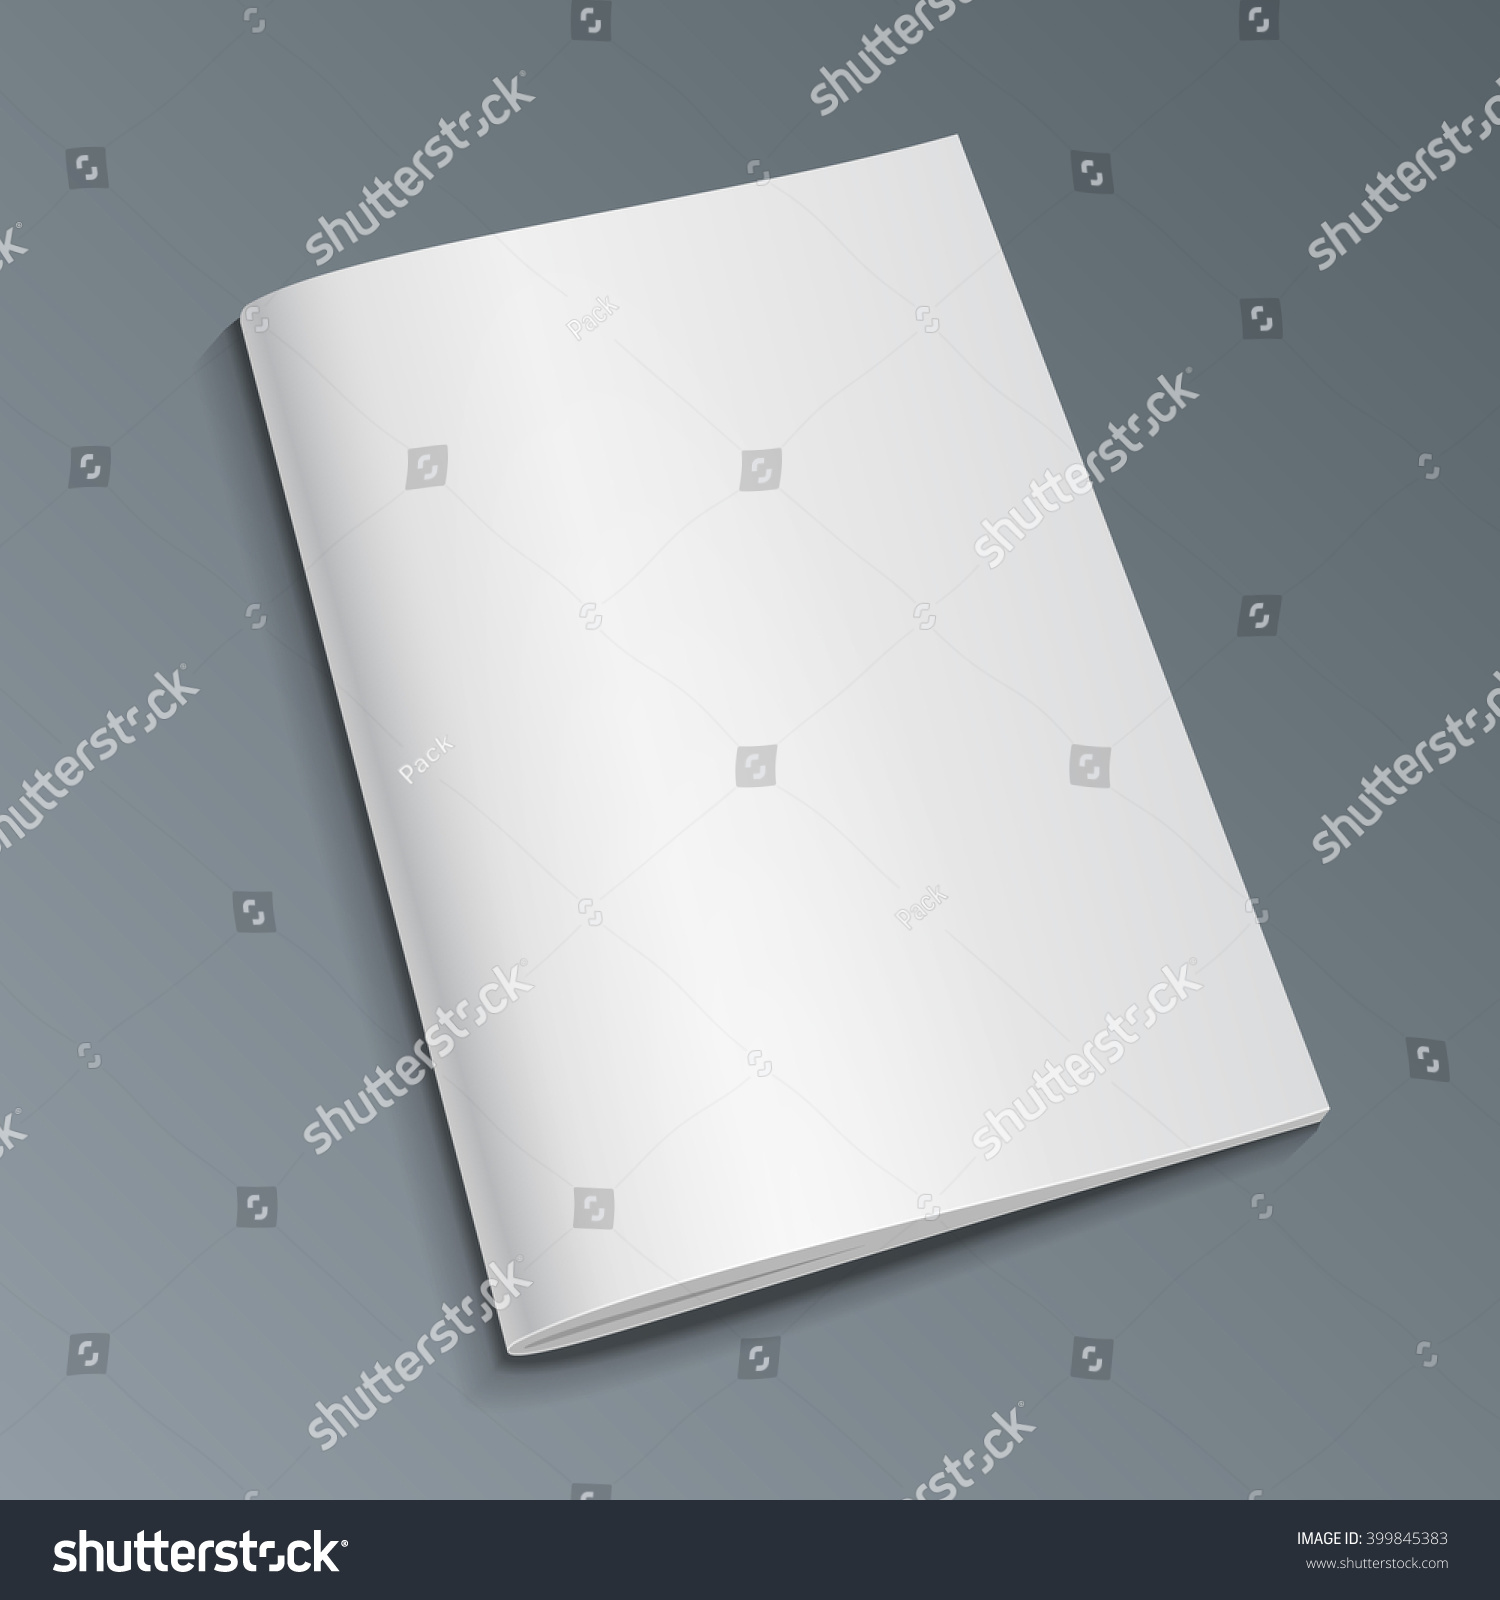 Mockup Blank Cover Of Magazine, Book, Booklet, Brochure. Illustration Isolated On Gray Background. Mock Up Template Ready For Your Design. Vector EPS10 #399845383